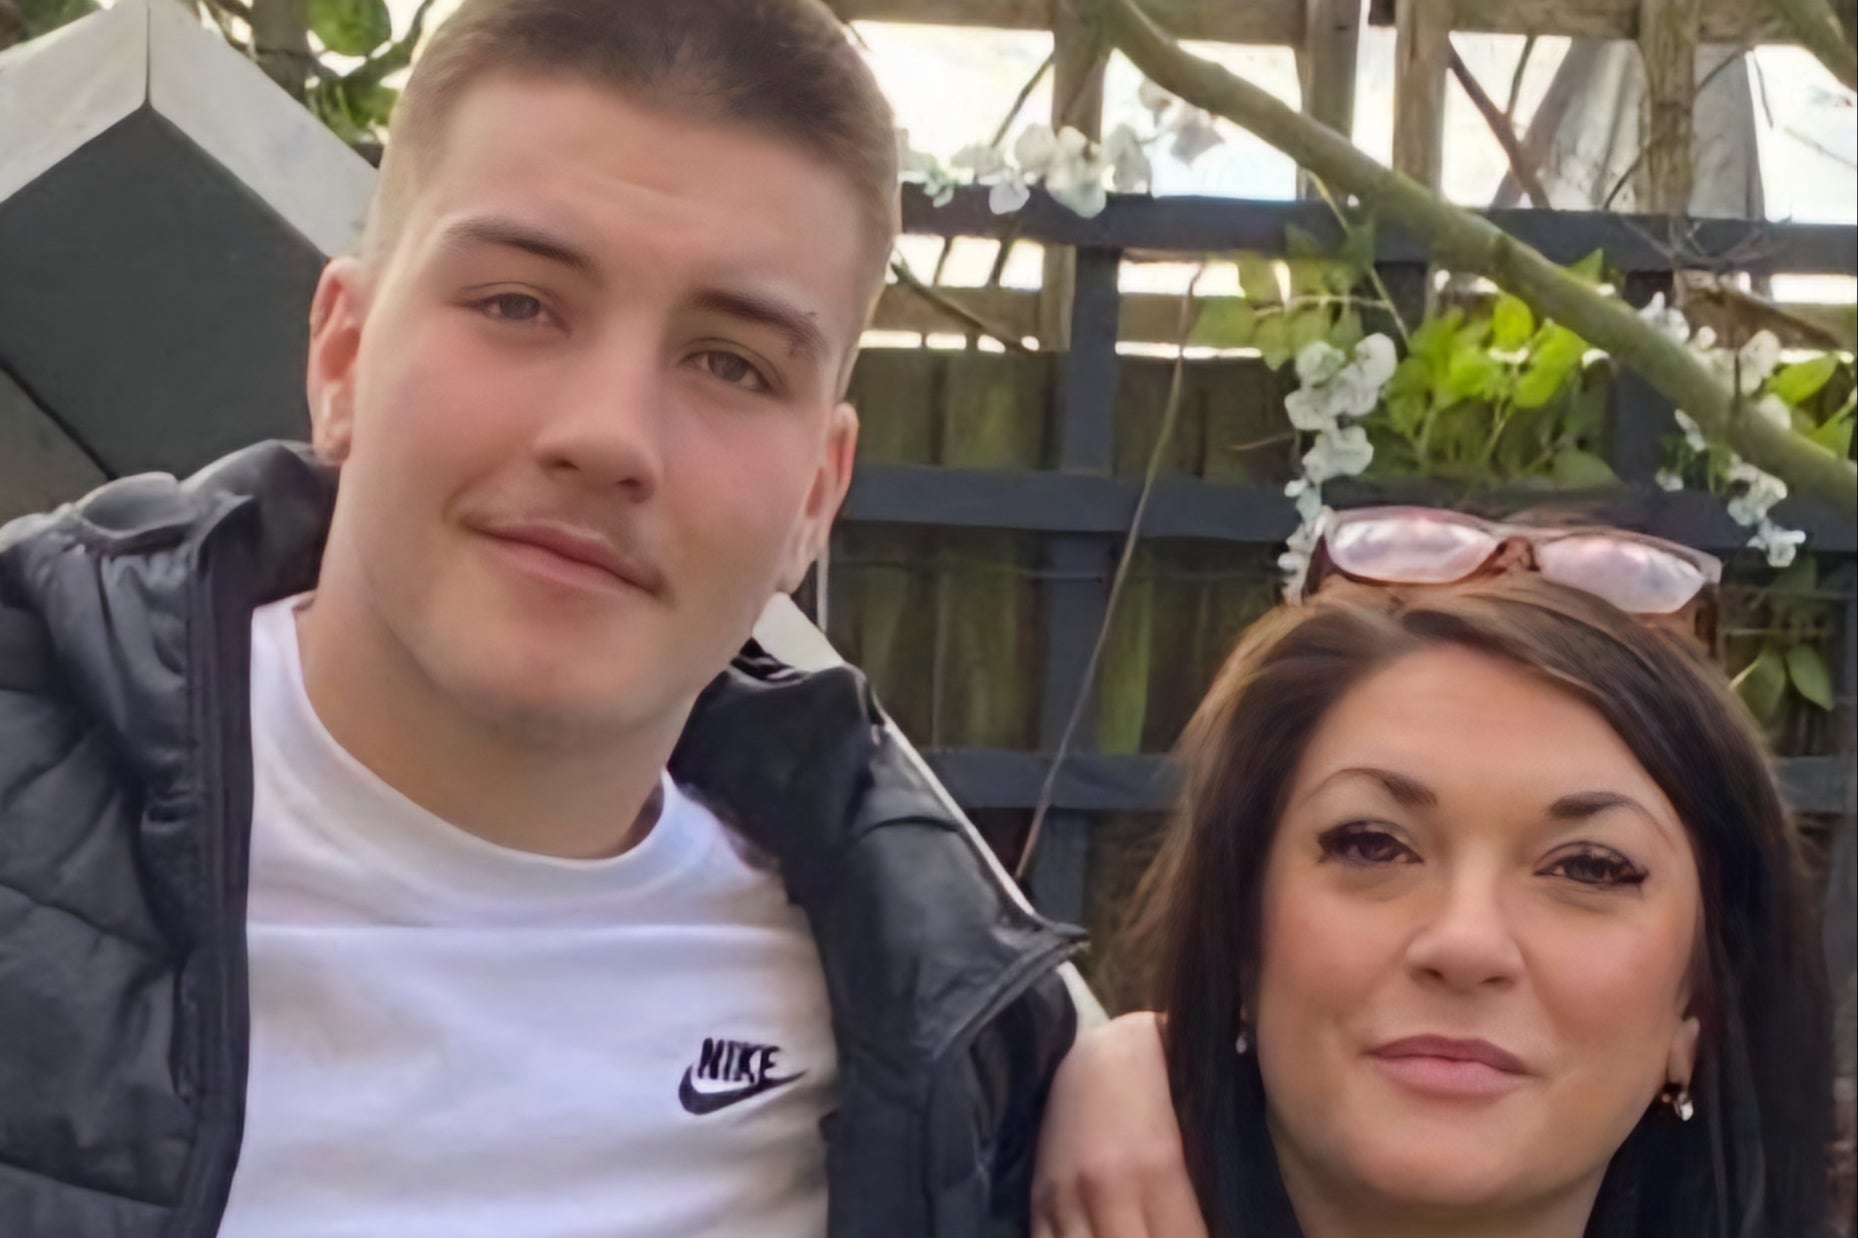 bournemouth, knife, heartbroken mother of teenager stabbed to death demands blanket ban on carrying knives